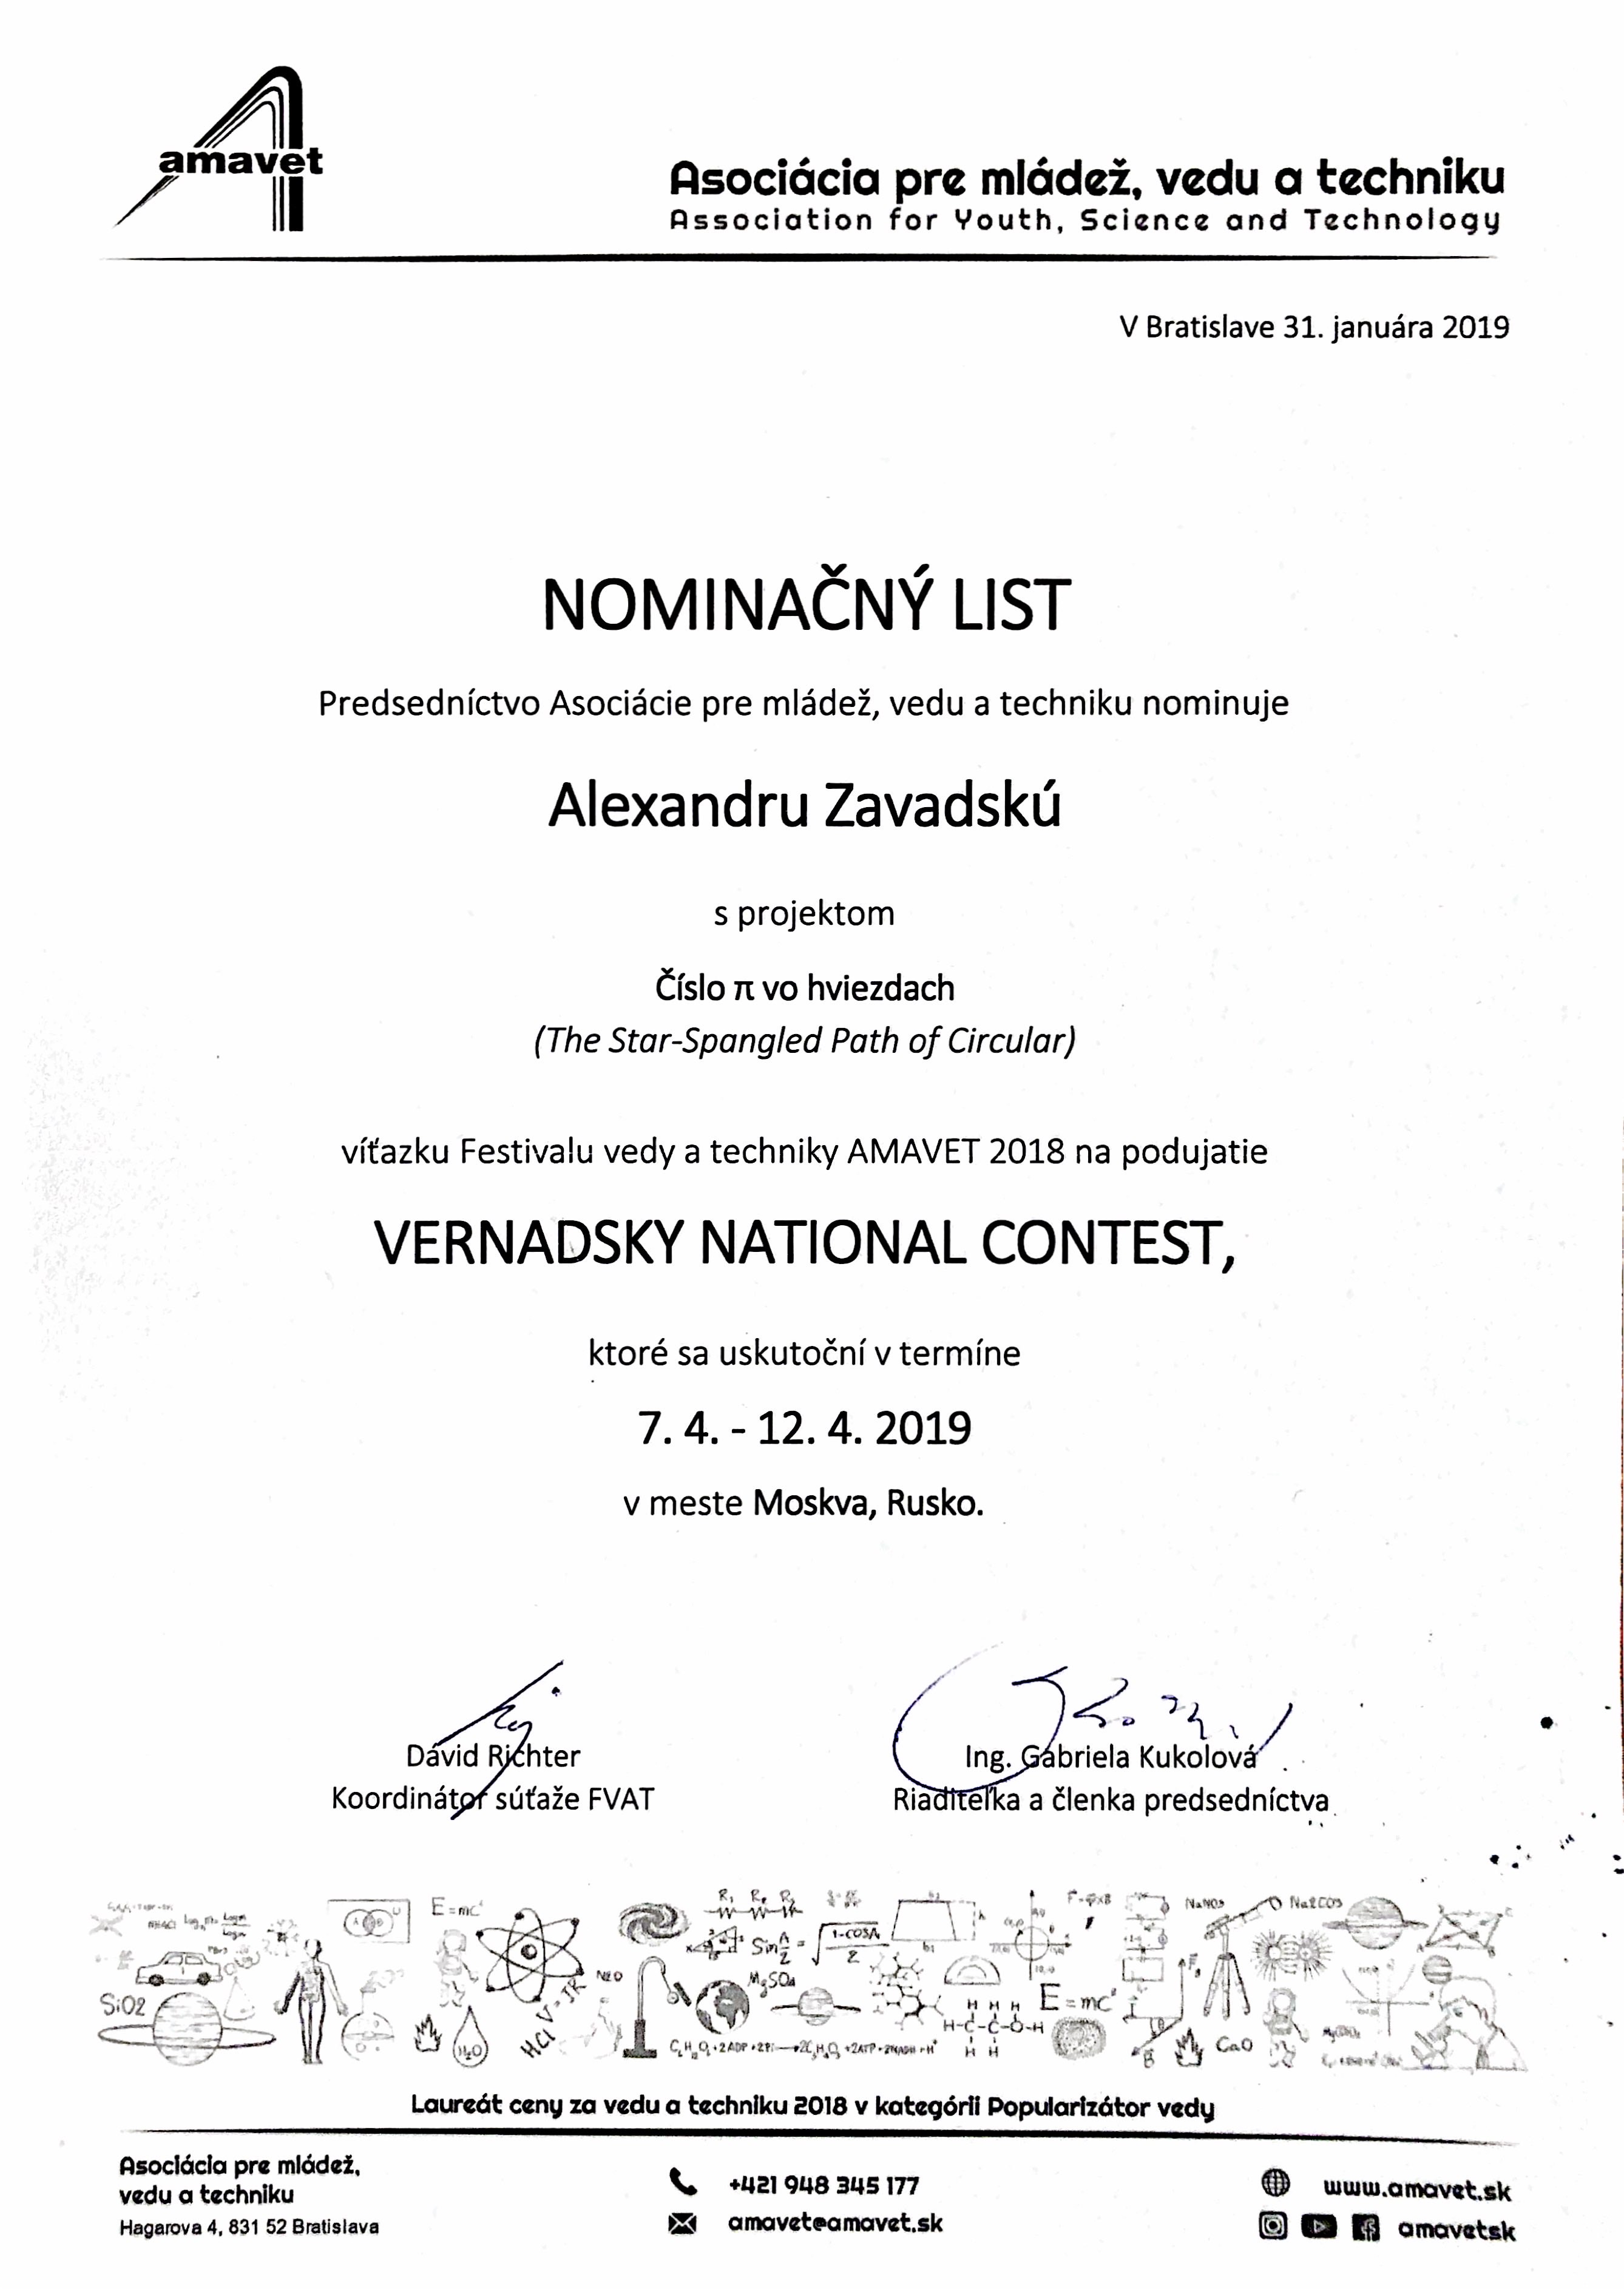 Nomination list for a panel conference Vernadsky National Contest held in Moscow, 2018, AMAVET